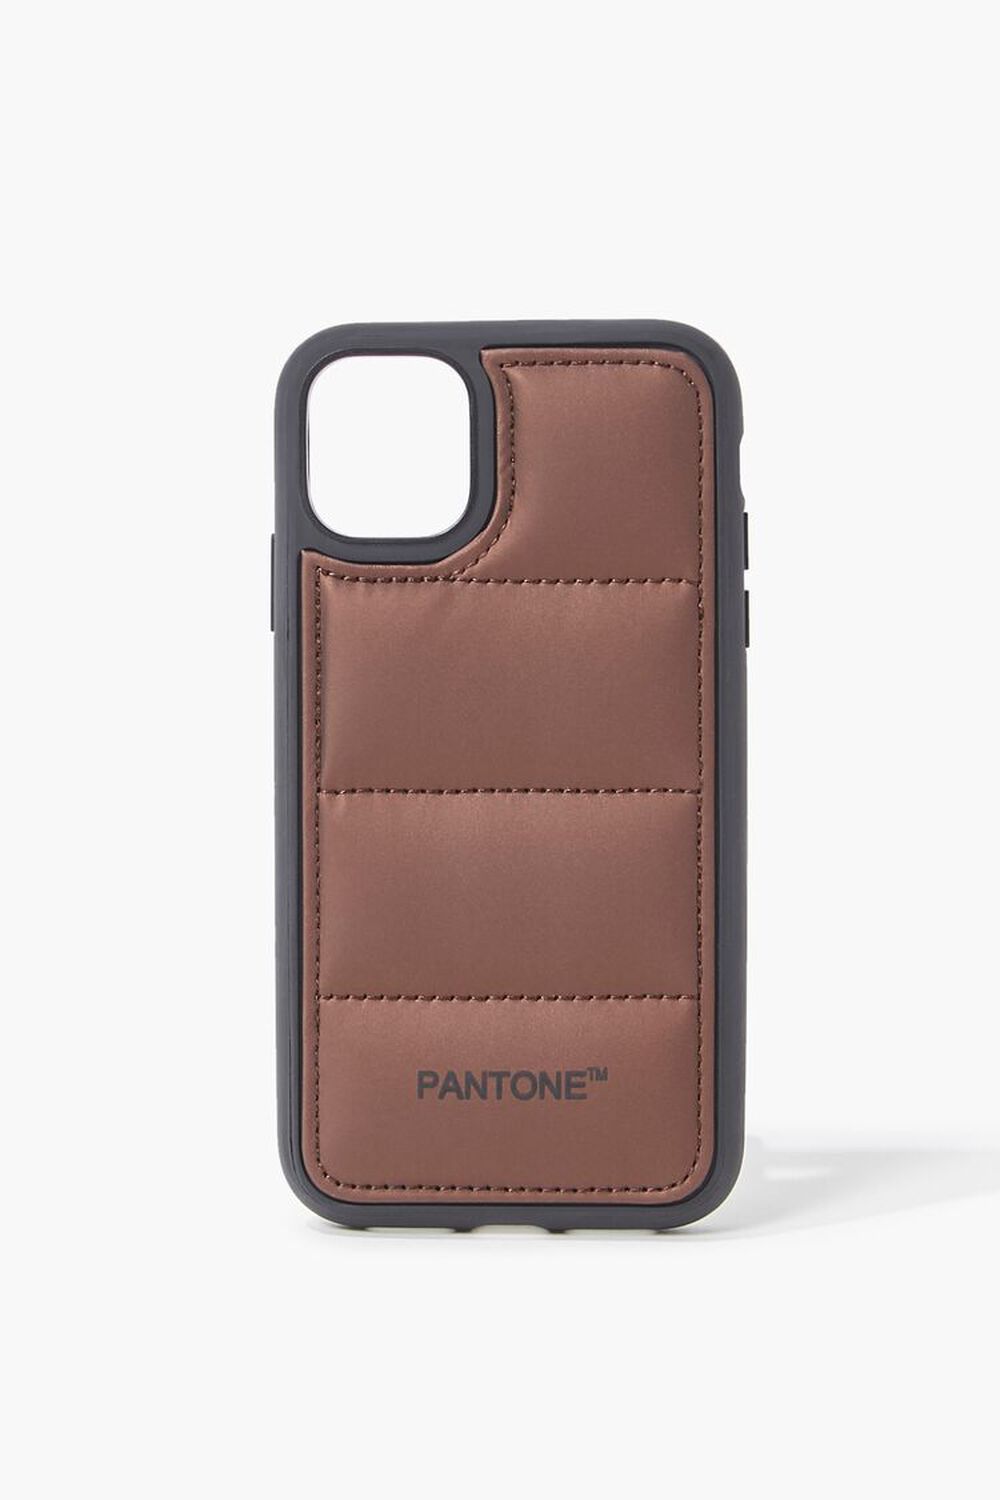 Pantone Case for iPhone 11, image 1